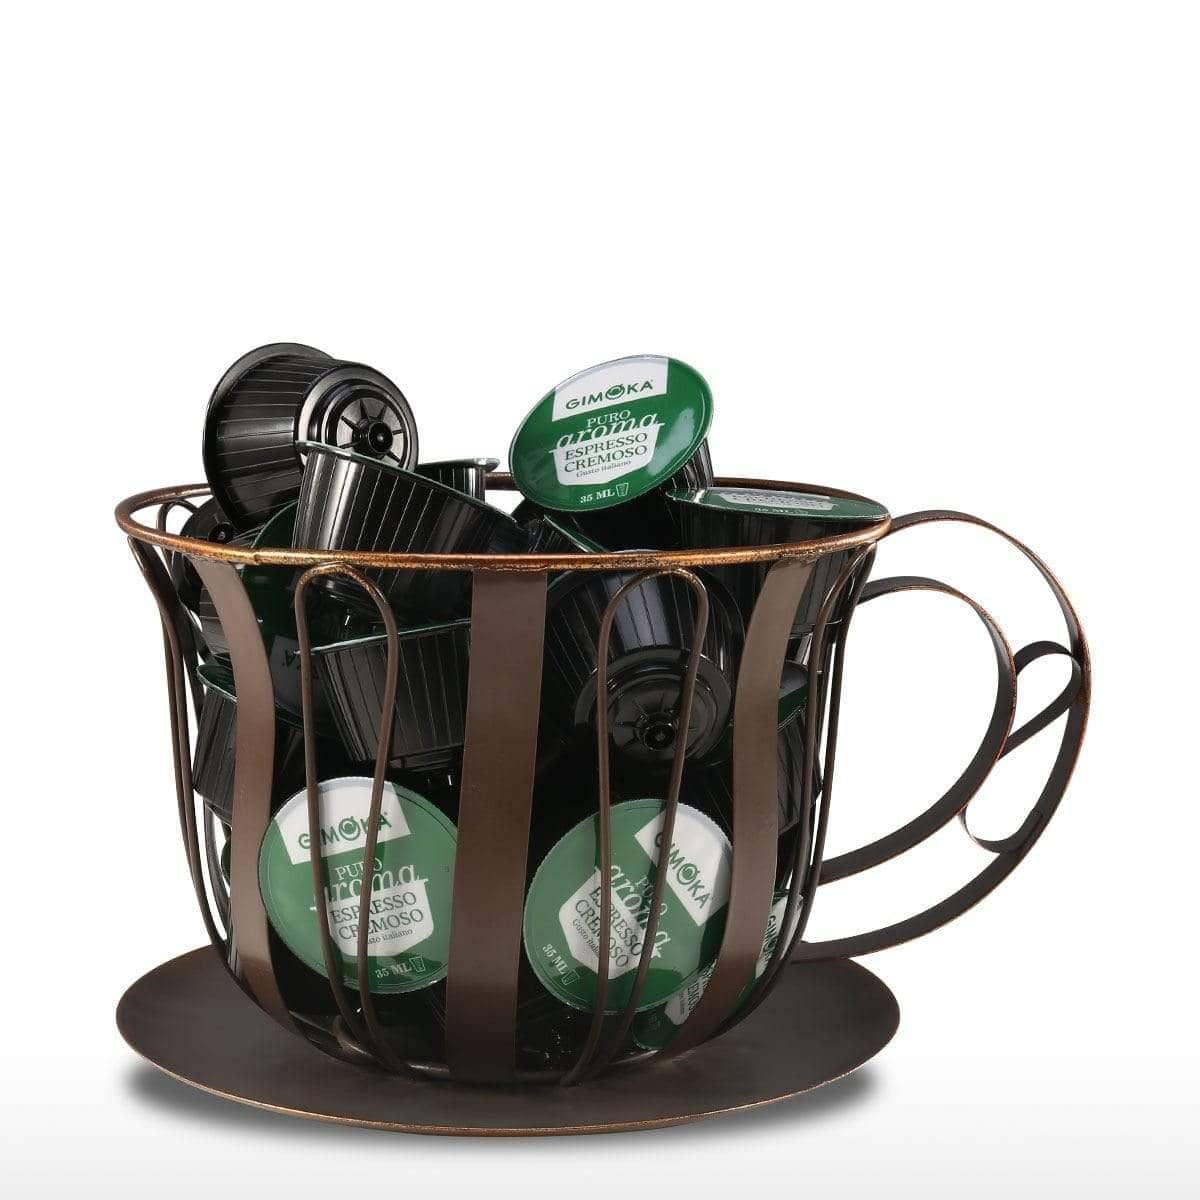 Coffee Pod Mug Storage Container - Organize Your Coffee Pods in Style